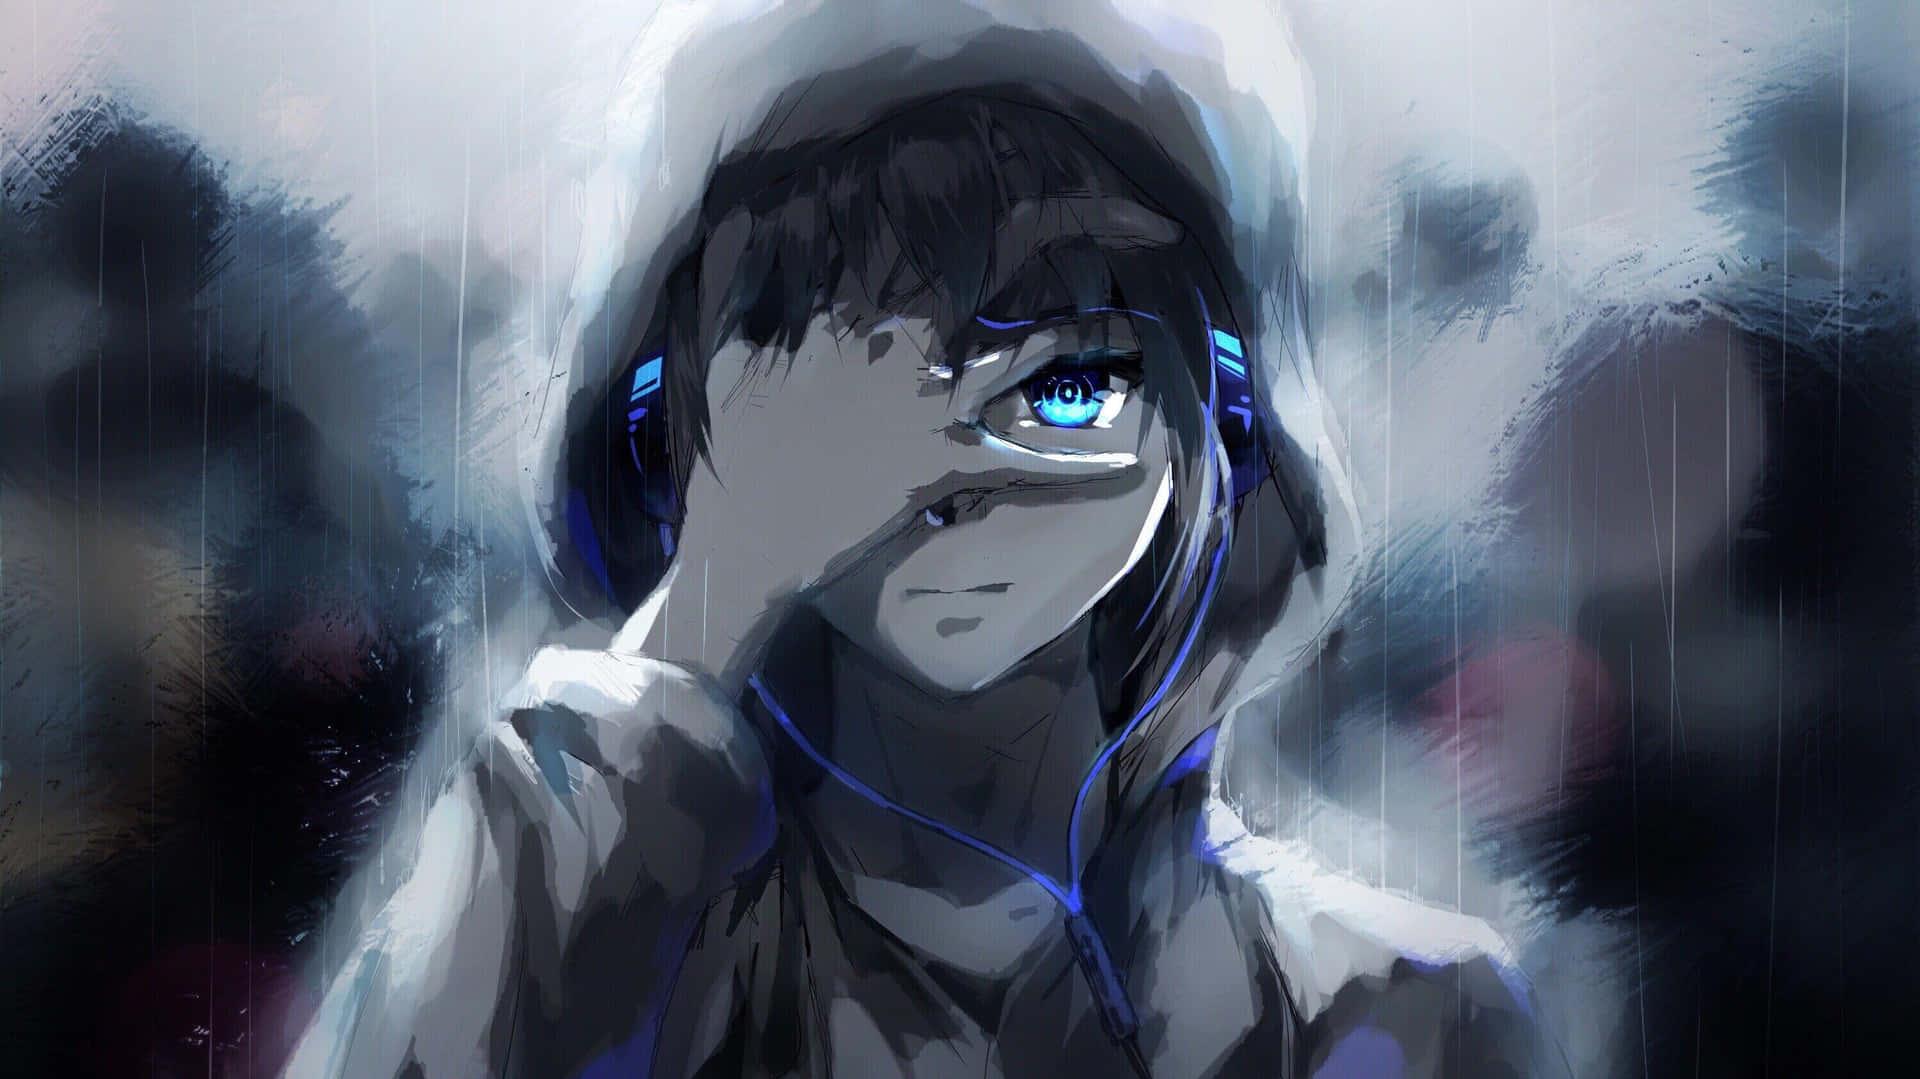 Download Anime Aesthetic Pfp Of A Boy With Blue Eyes Wallpaper